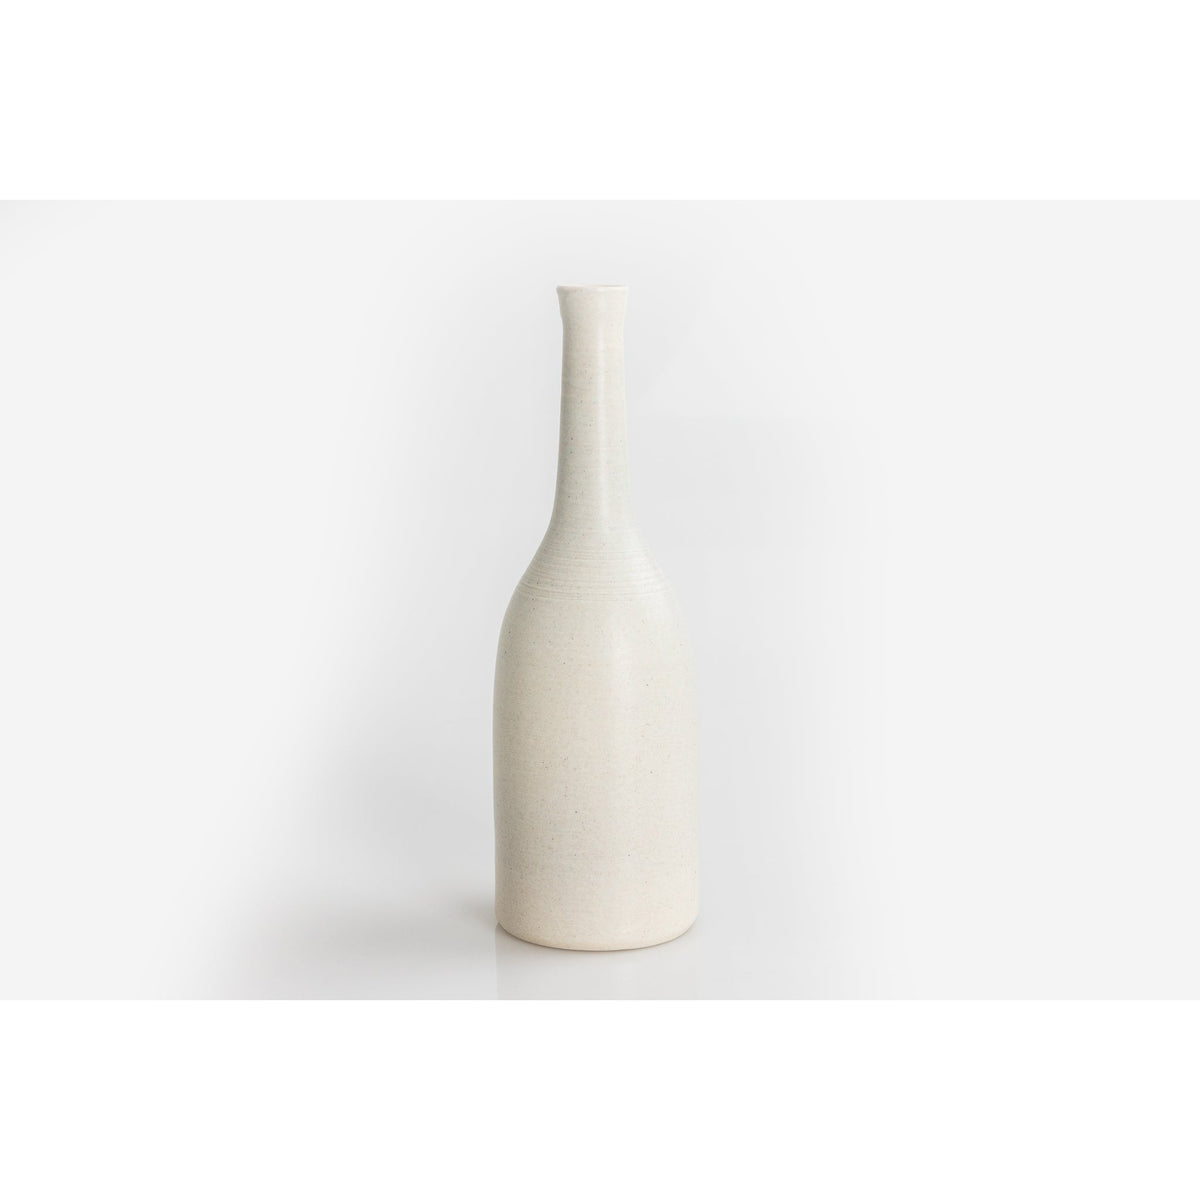 &#39;LB150 Palest Grey Bottle&#39; by Lucy Burley ceramics, available at Padstow Gallery, Cornwall